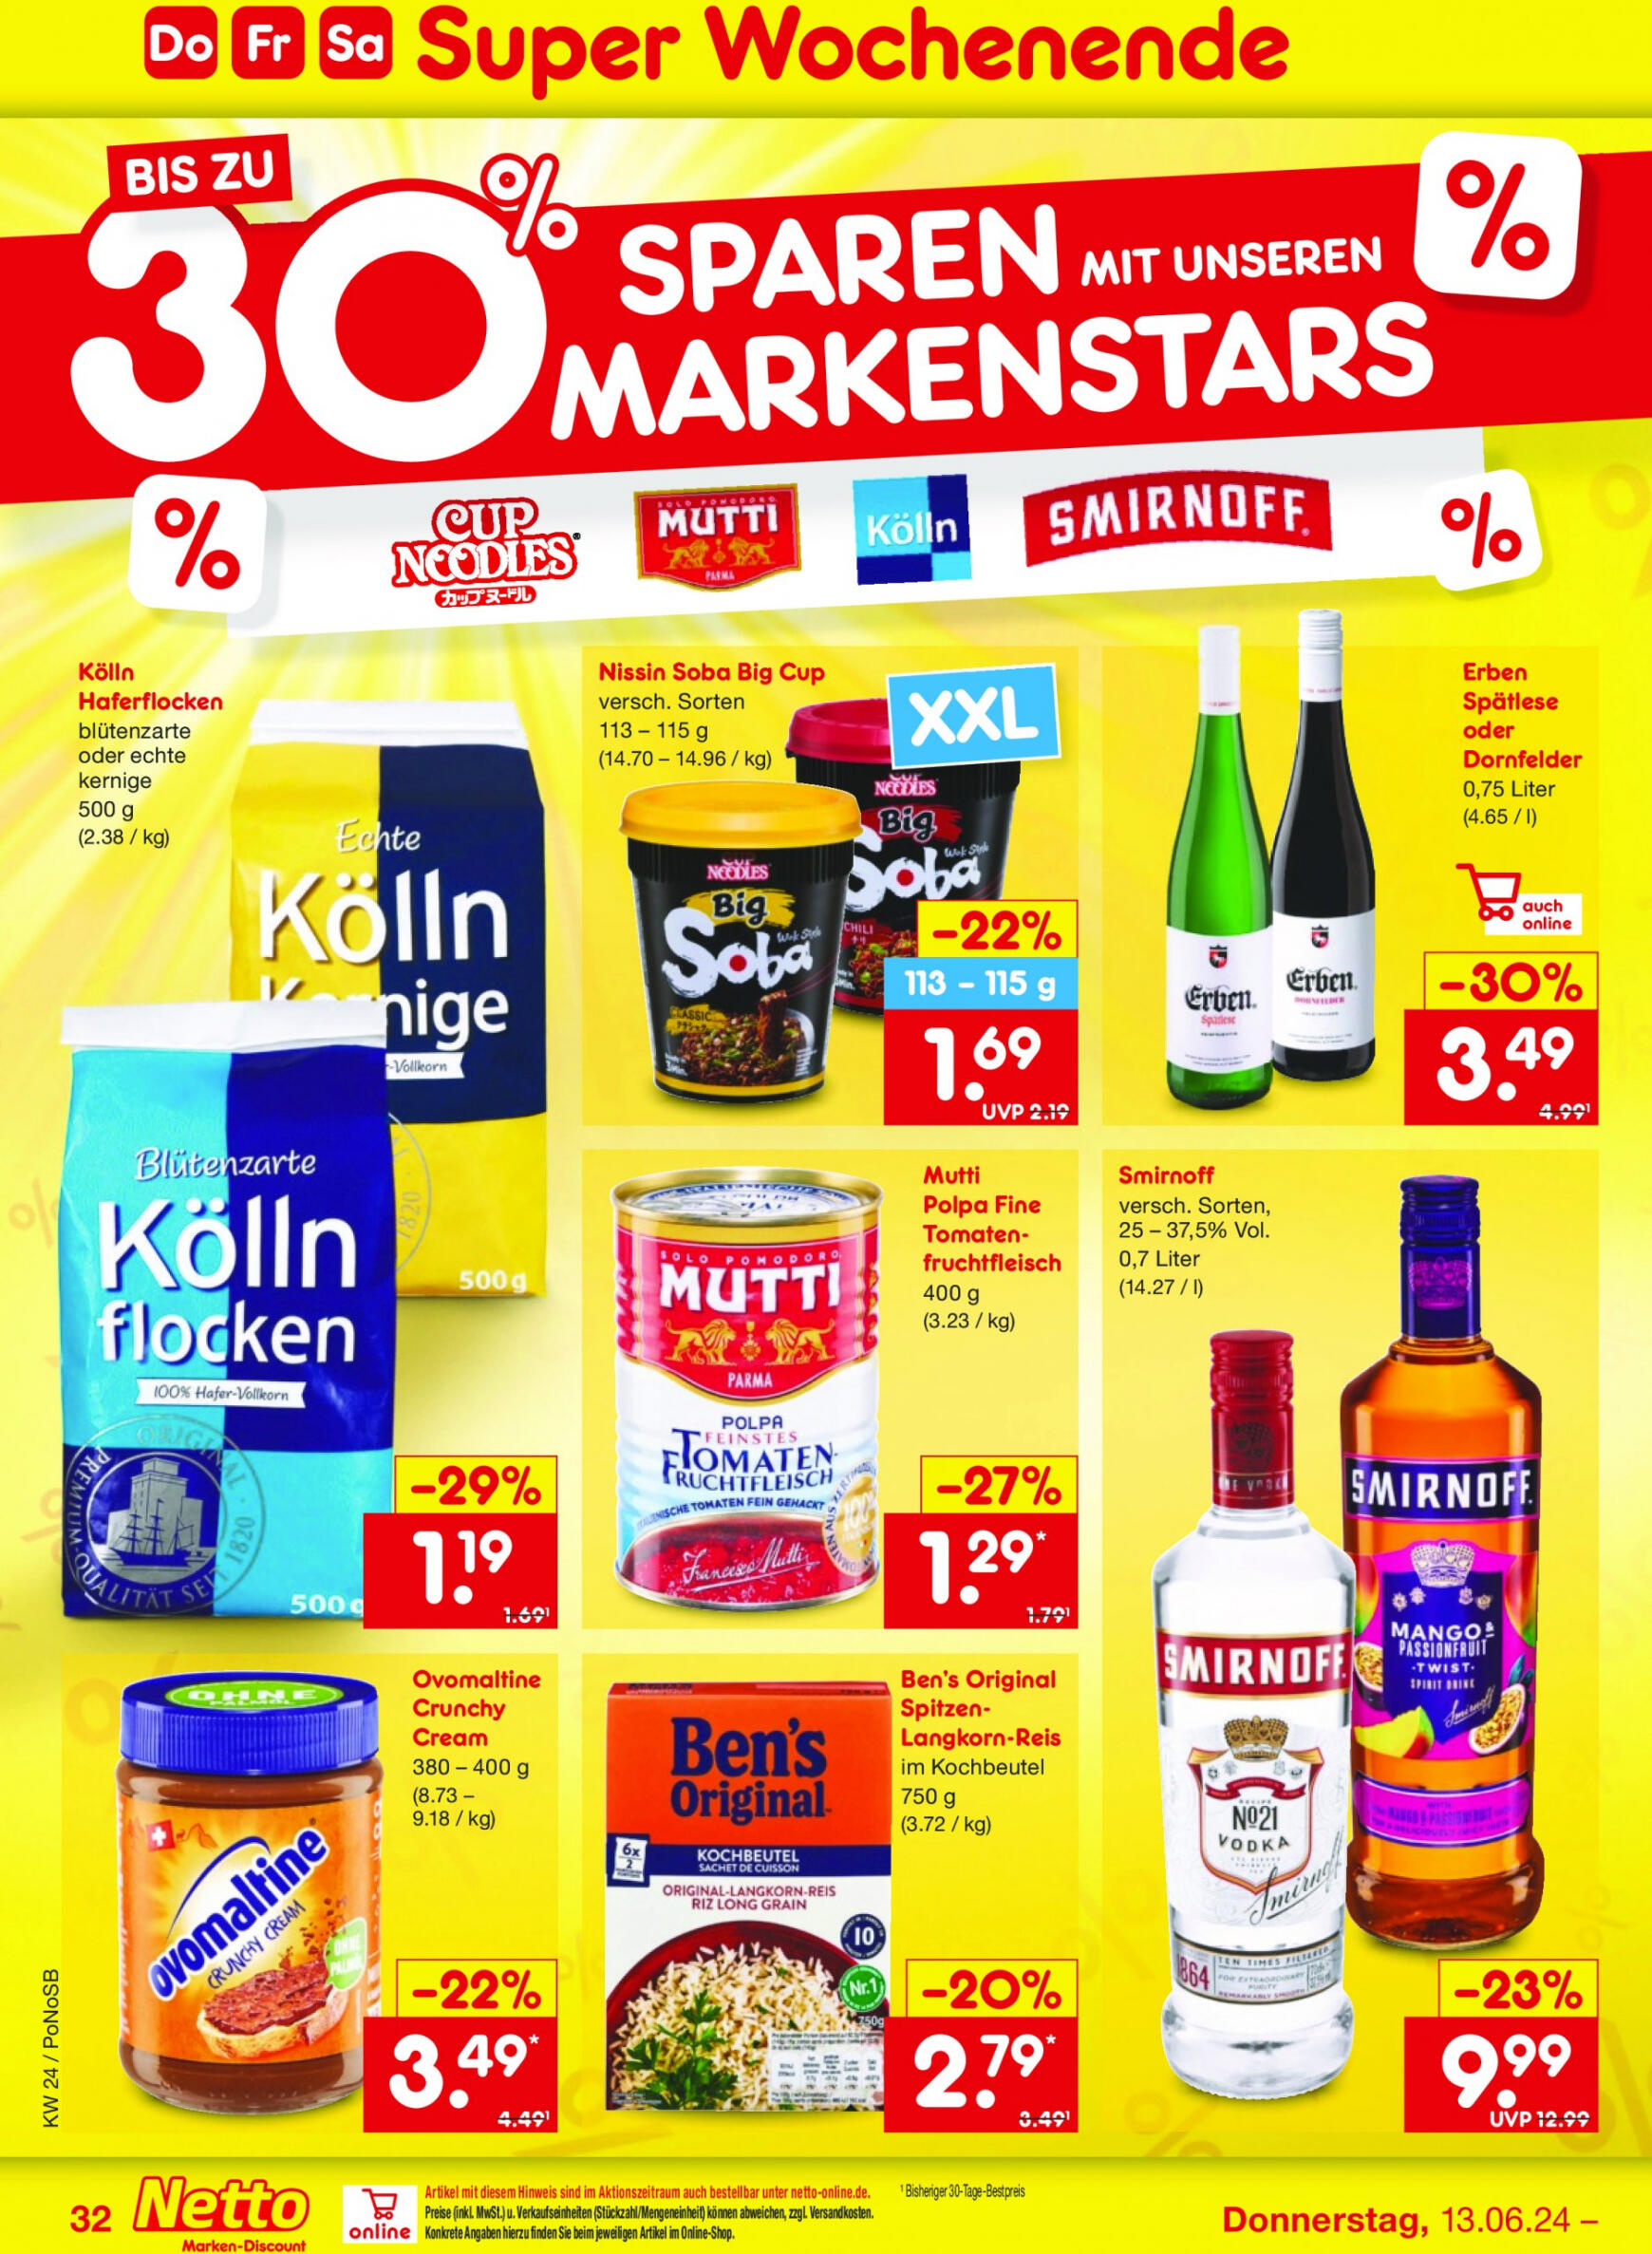 netto - Flyer Netto aktuell 10.06. - 15.06. - page: 48